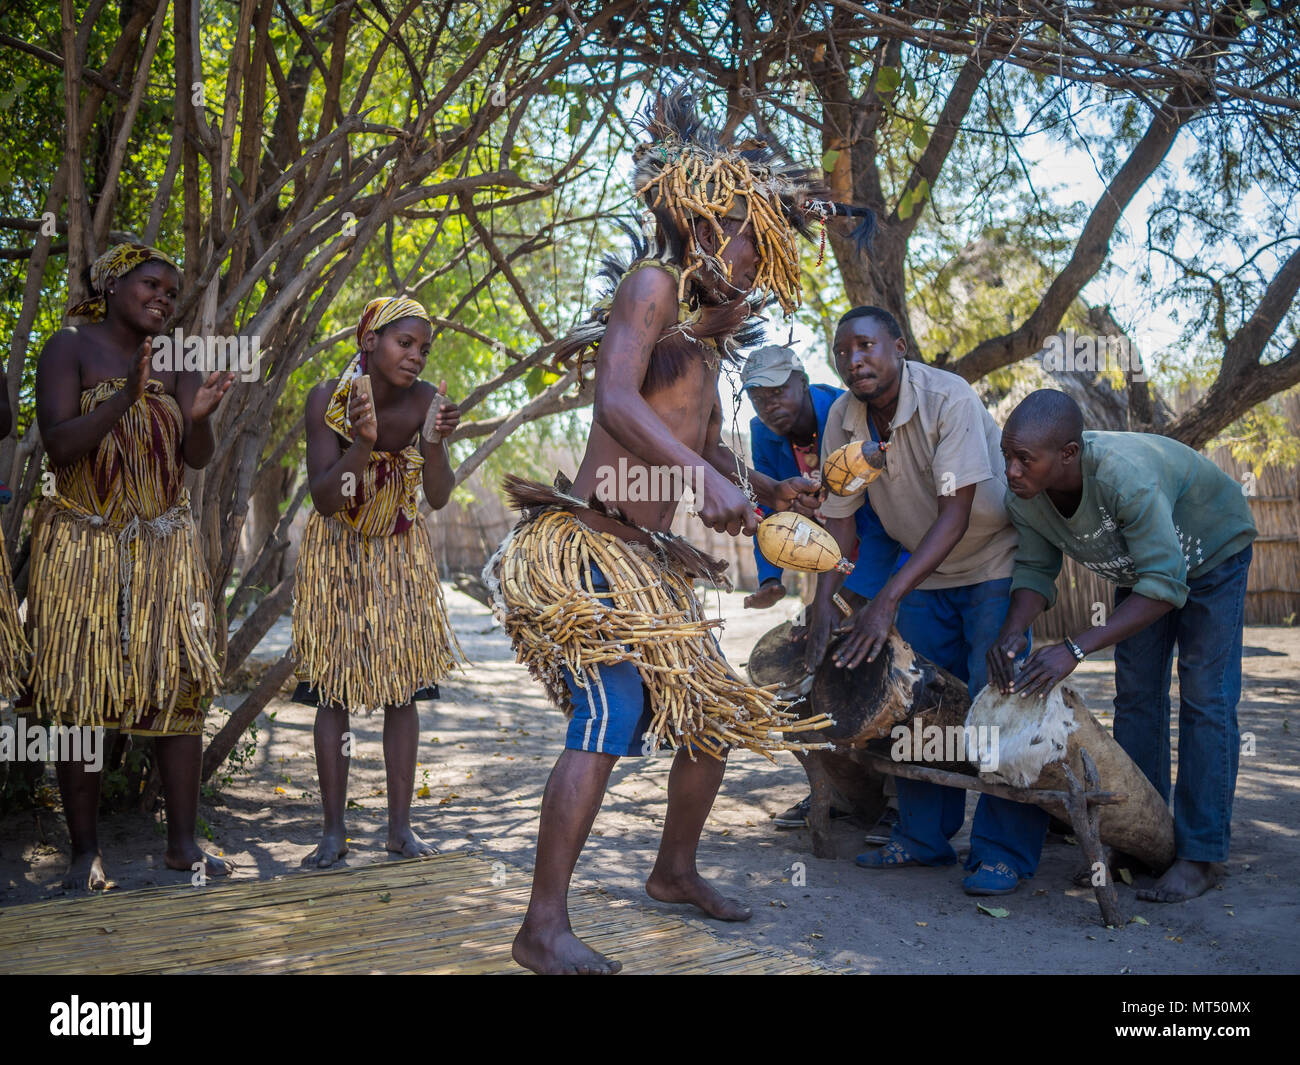 Luzibalule, Namibia - August 13, 2015: Medicine man and others dancing to traditional music, Lizauli Traditional Village Stock Photo